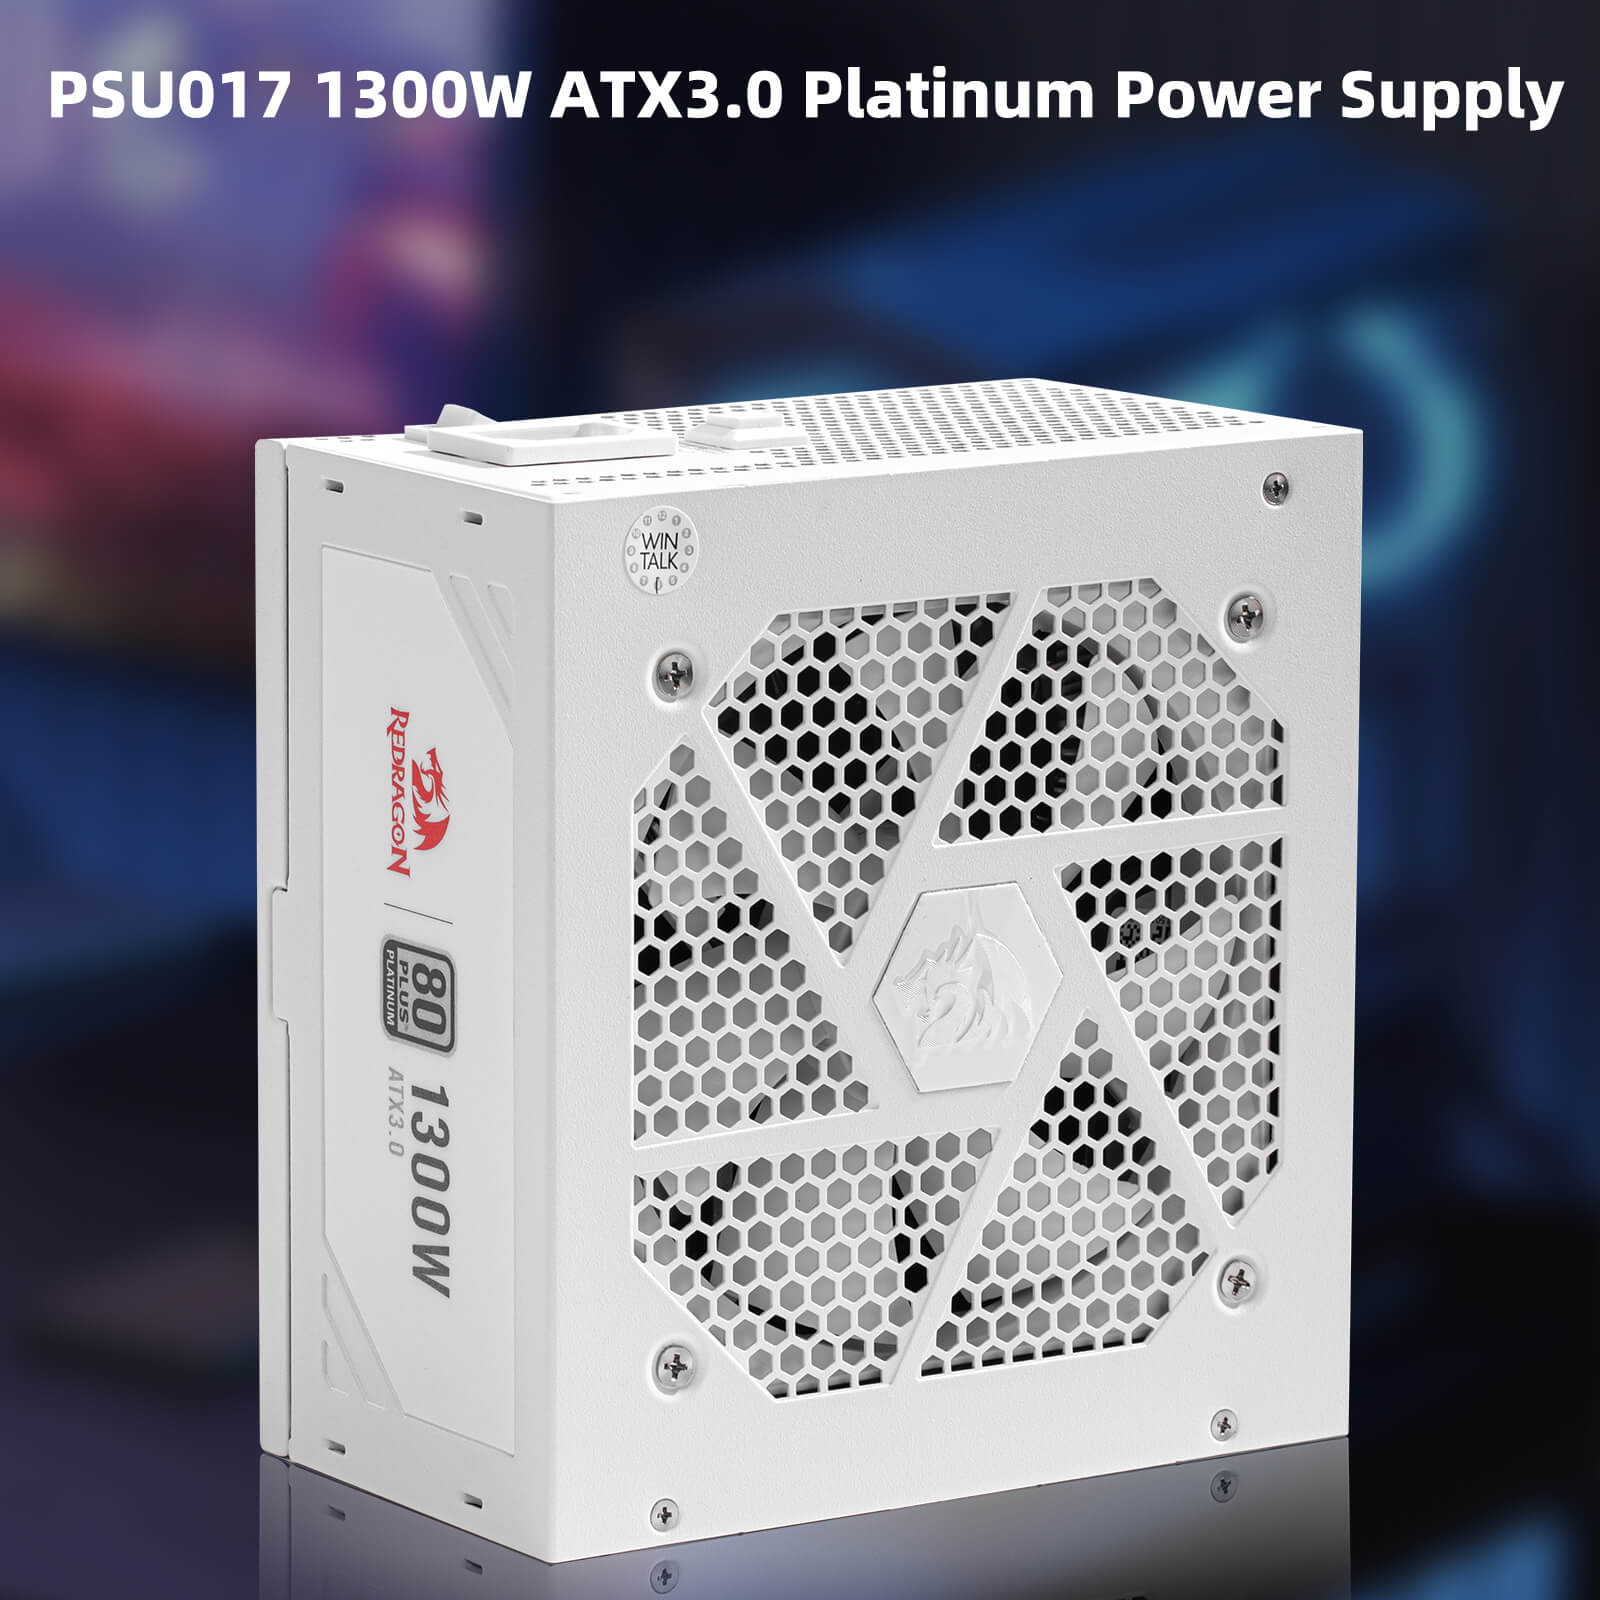  Redragon PSU006 80+ Gold 750 Watt ATX Fully Modular Power  Supply w/ 80 Plus Gold Certified, Compact 160mm Size and Low Noise RGB Fan  0 RPM, 100% Japanese Capacitors, Full Mod Cables, White : Electronics